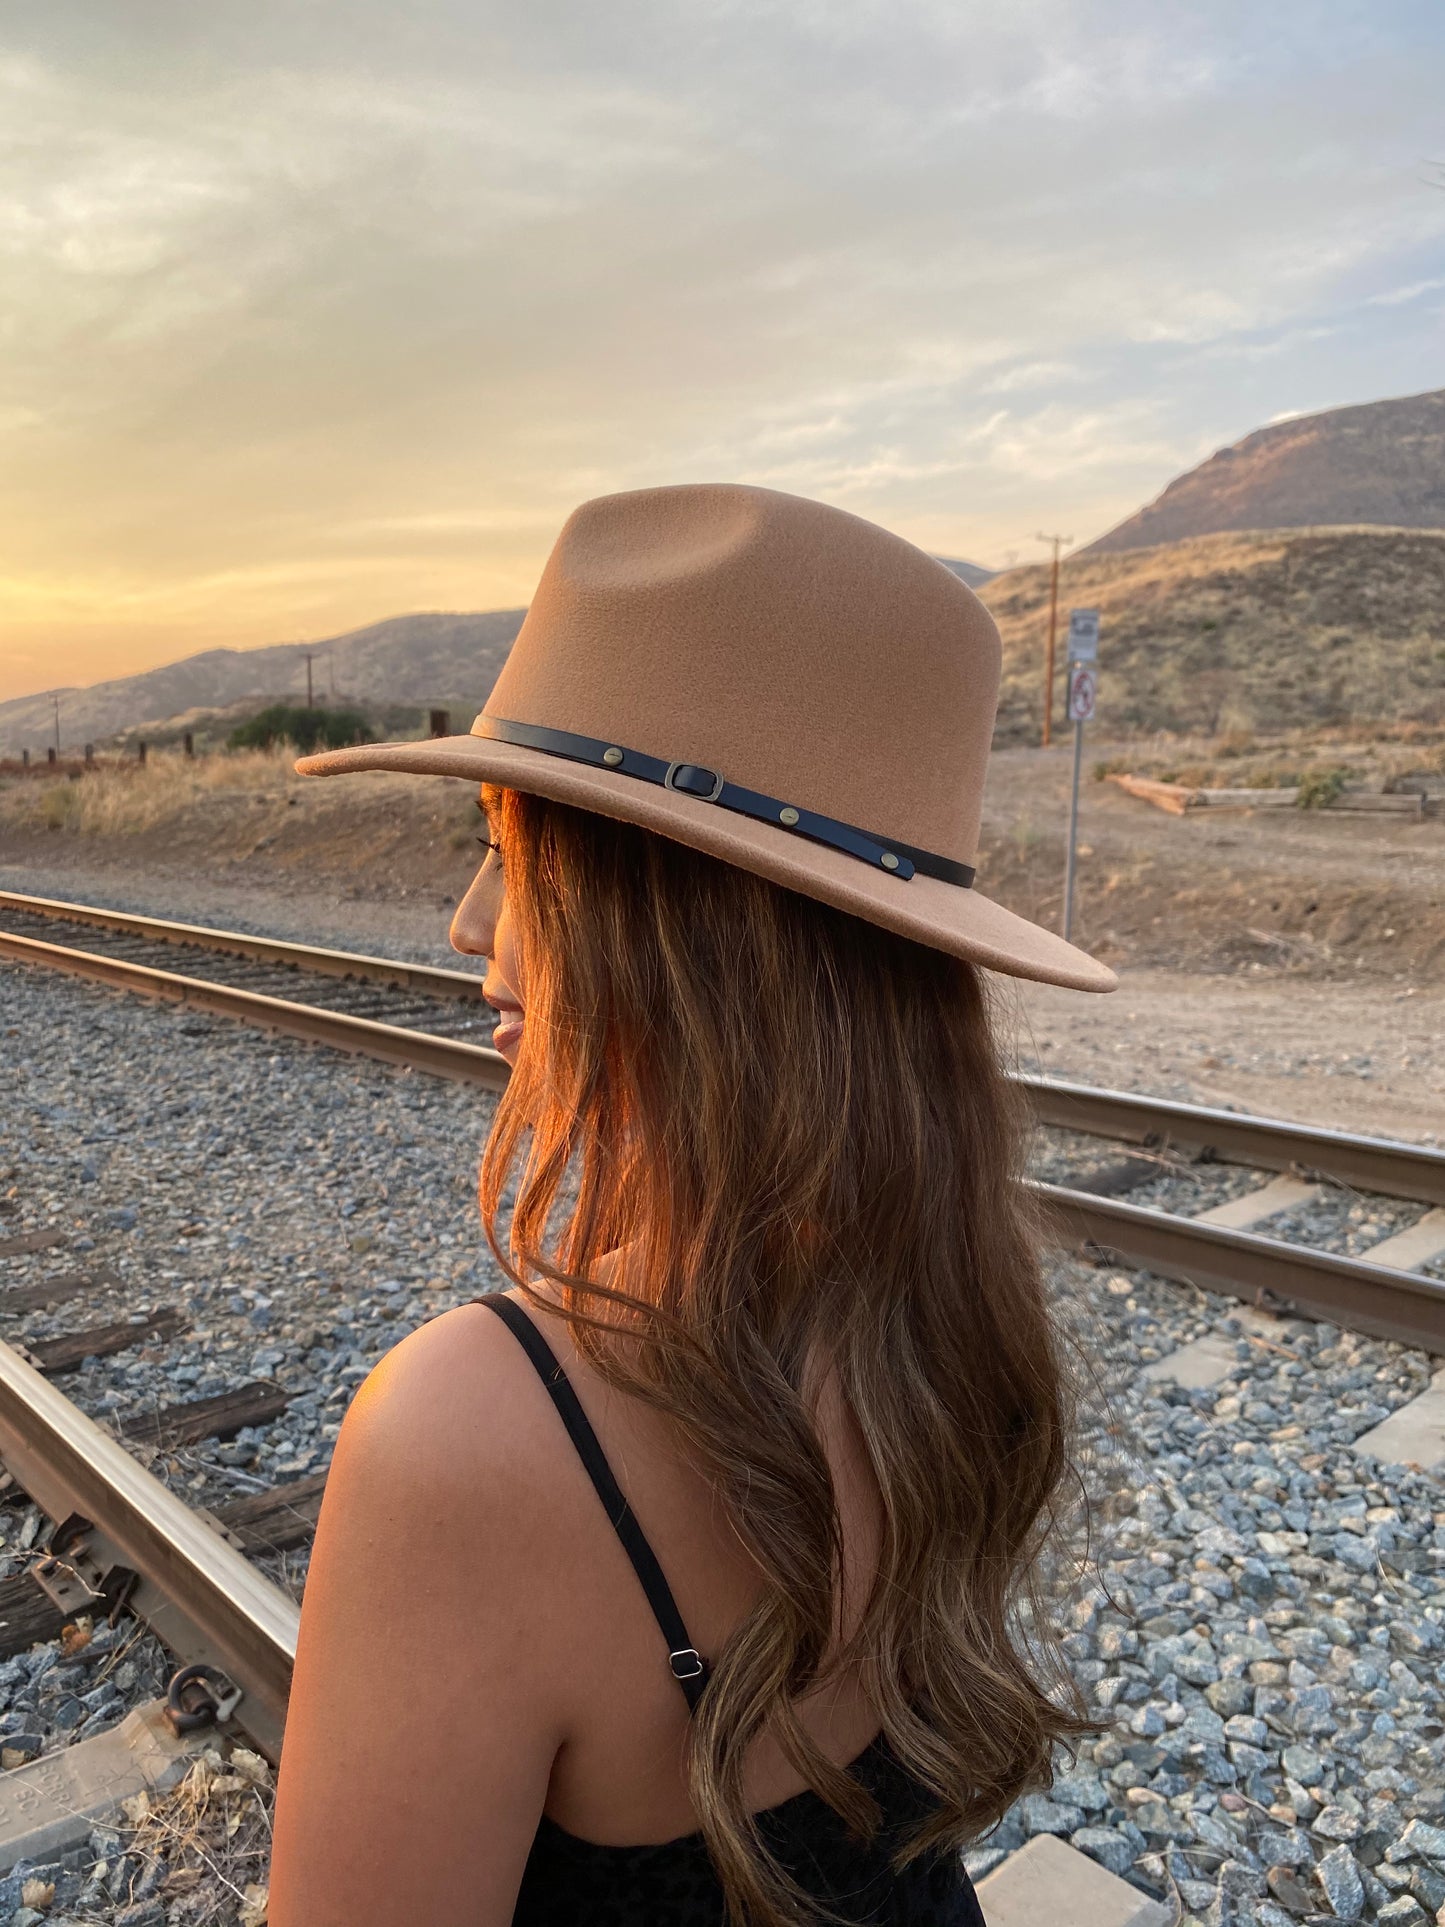 Women's Flat Wide Brim Felt Material Camel Brown Fedora Hat. Has A Side Black Belt Buckle Detail. Pinched Crown. Perfect for A Statement Piece. 